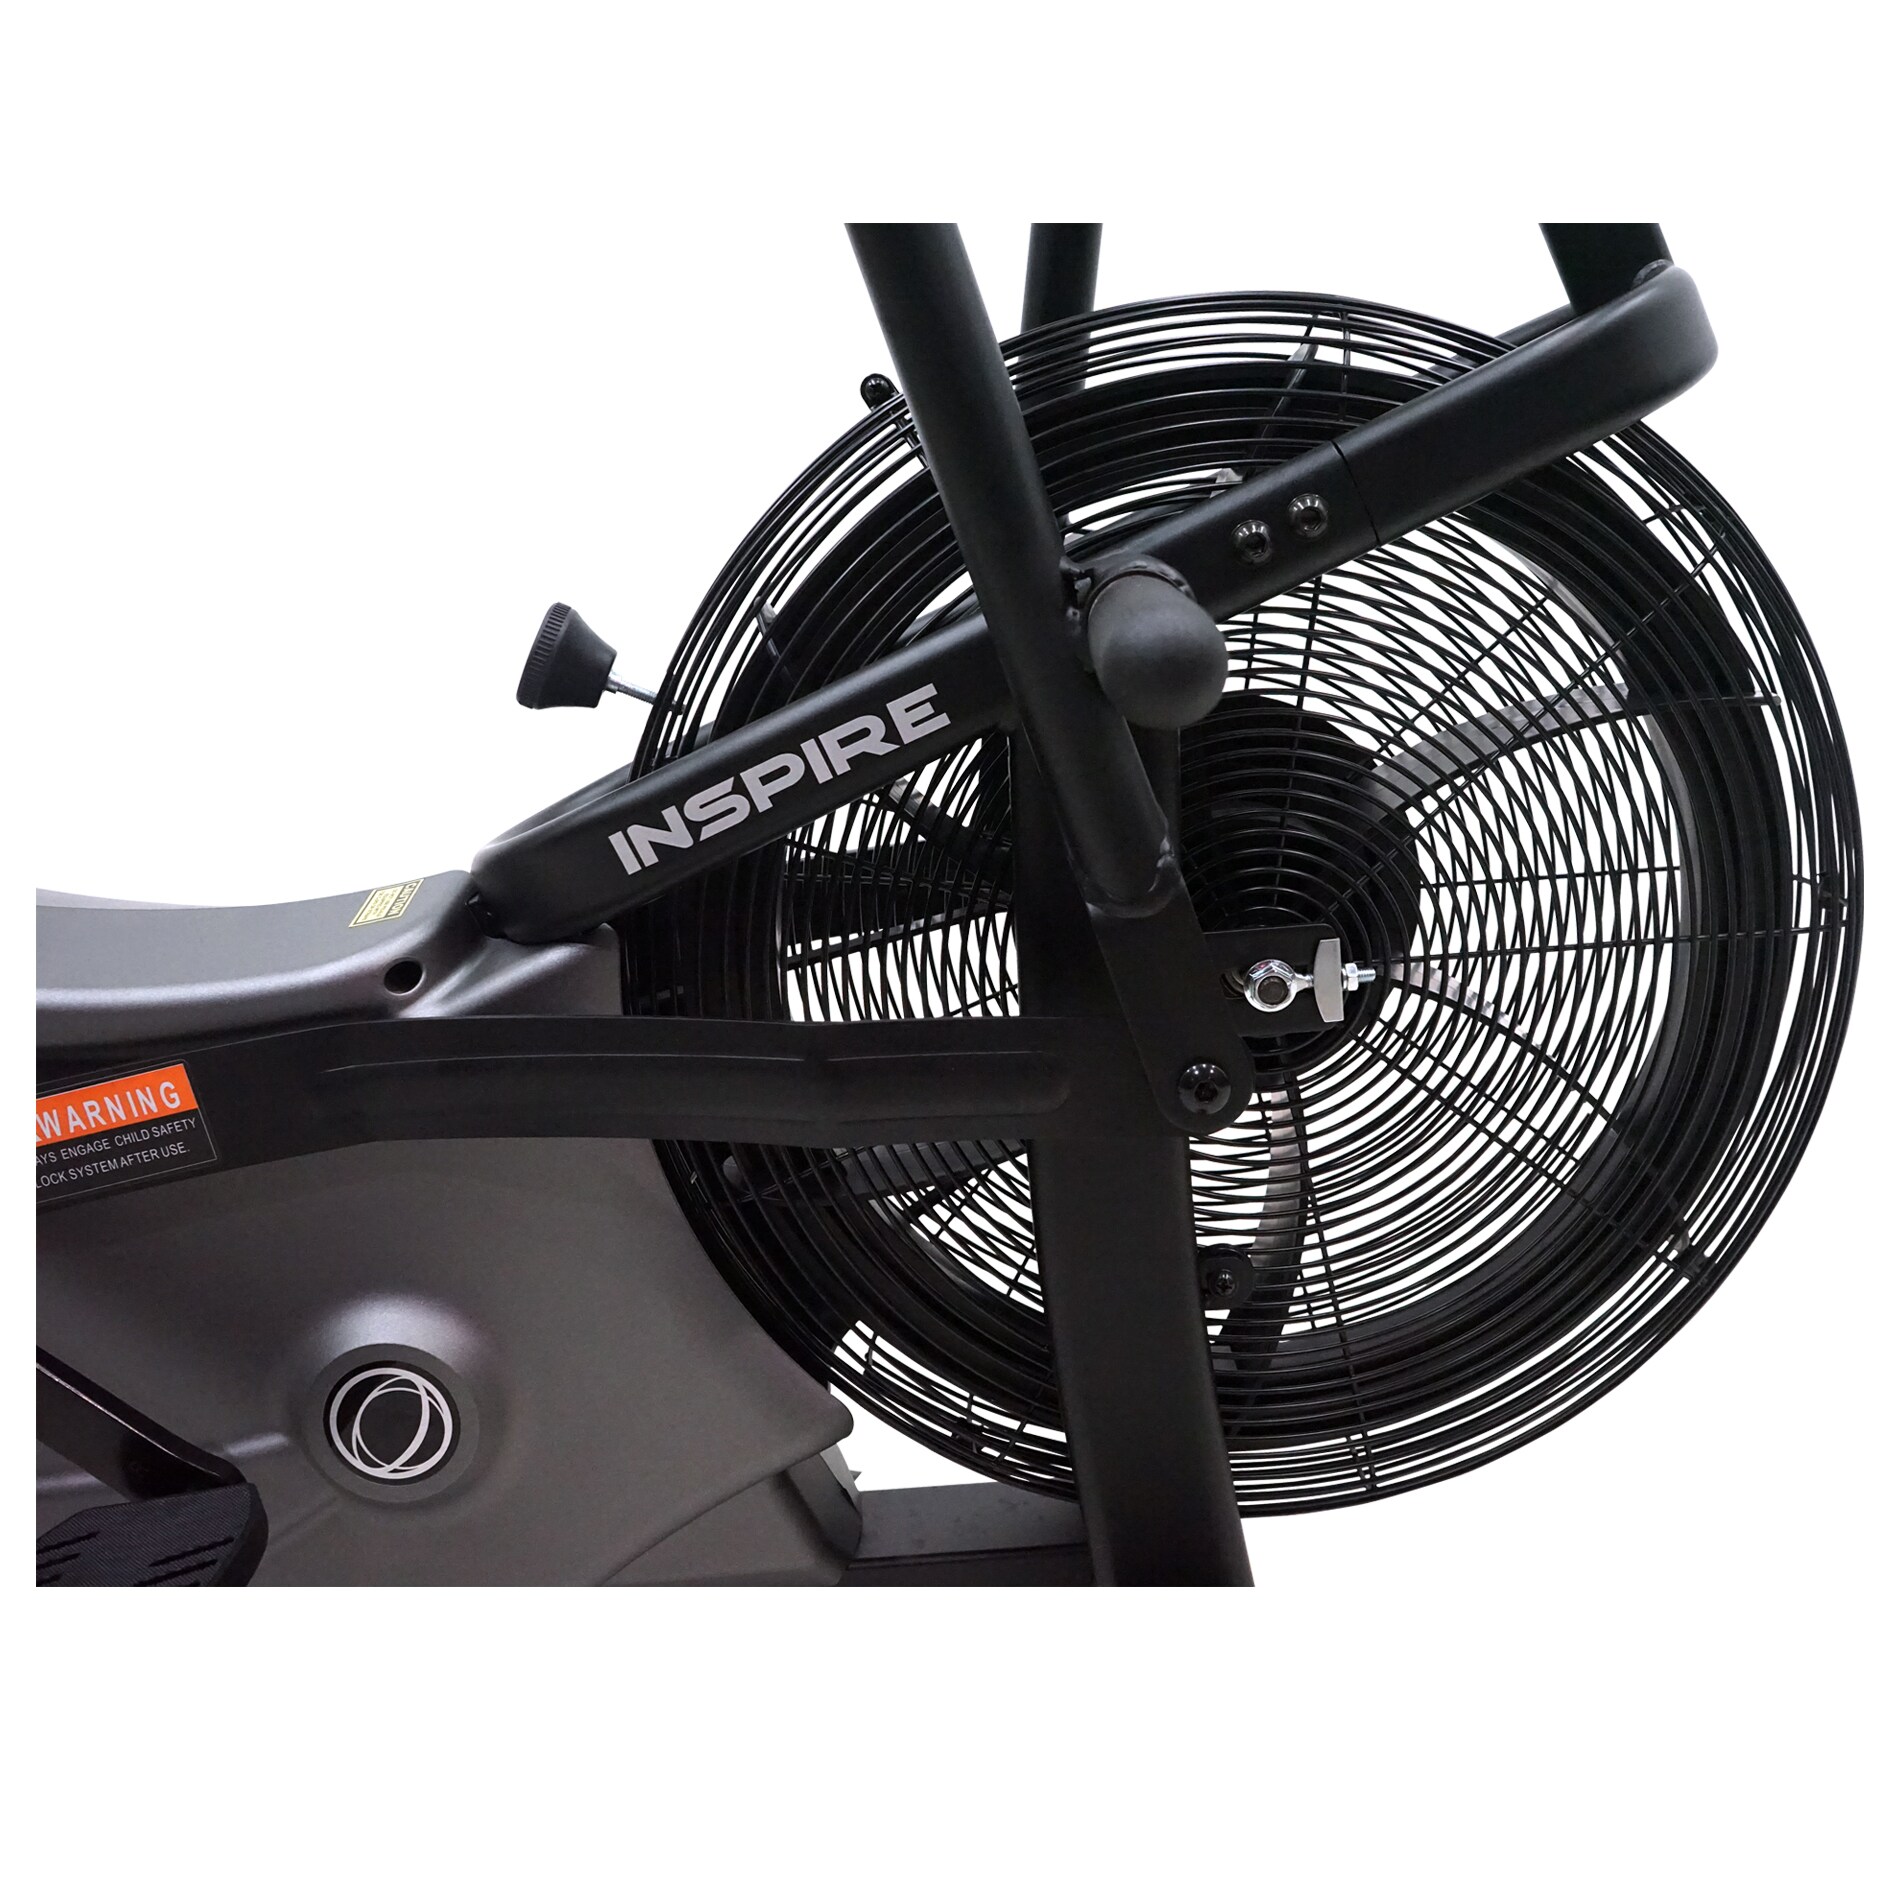  Inspire Fitness CB1 Resistance Air Bike Trainer - Stationary  Exercise Bike - Fan Bike with Arm Exercisers - Cardio Bike : Sports &  Outdoors